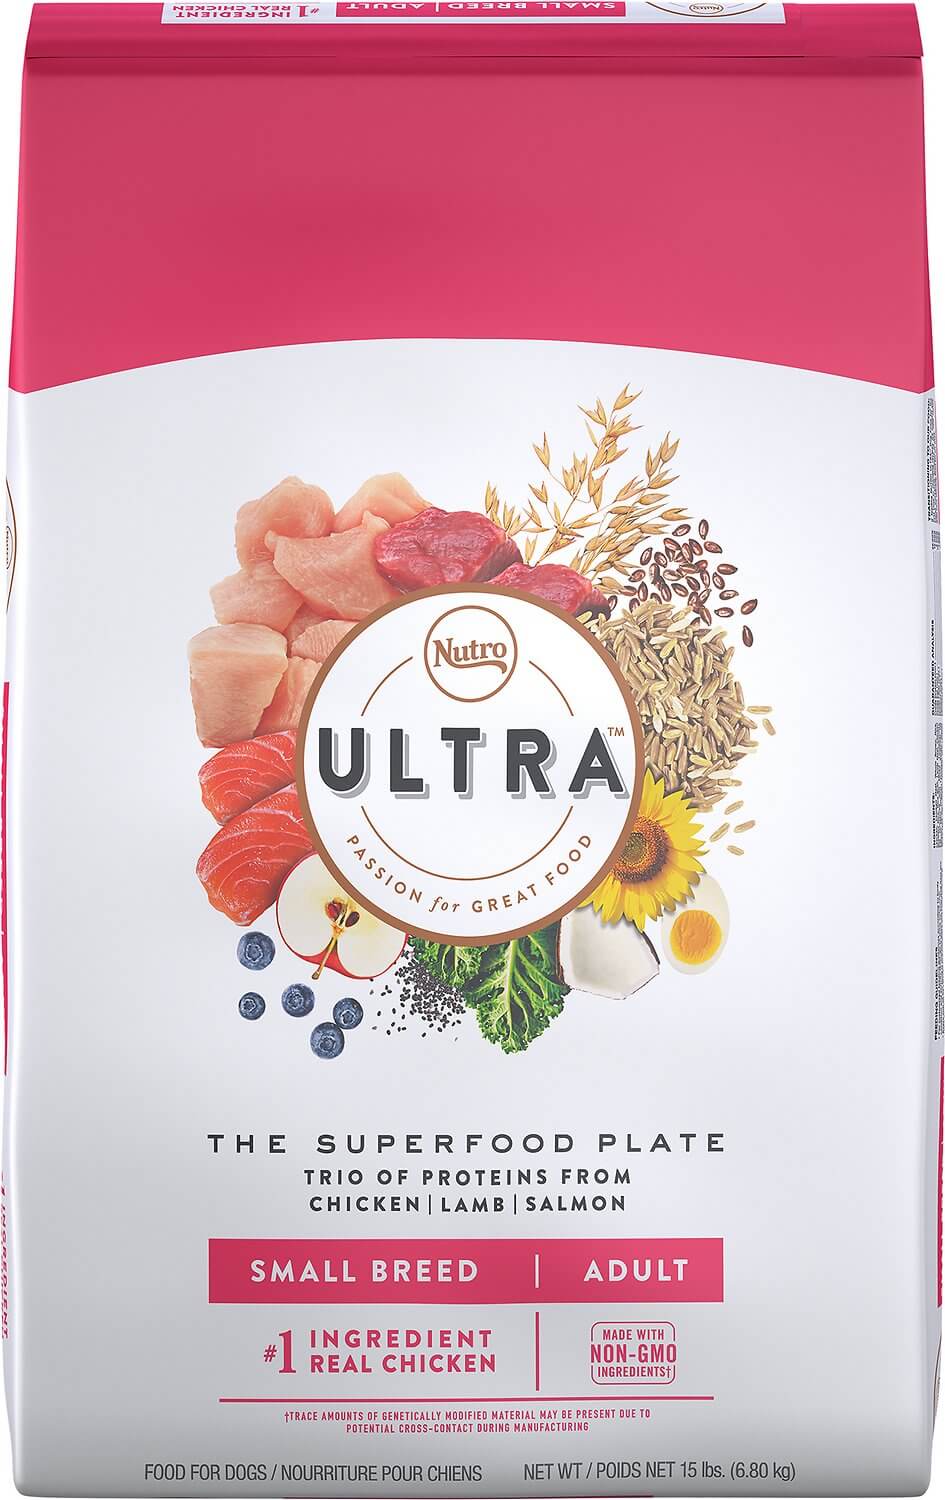 Nutro Ultra Dog Food Review Rating Recalls